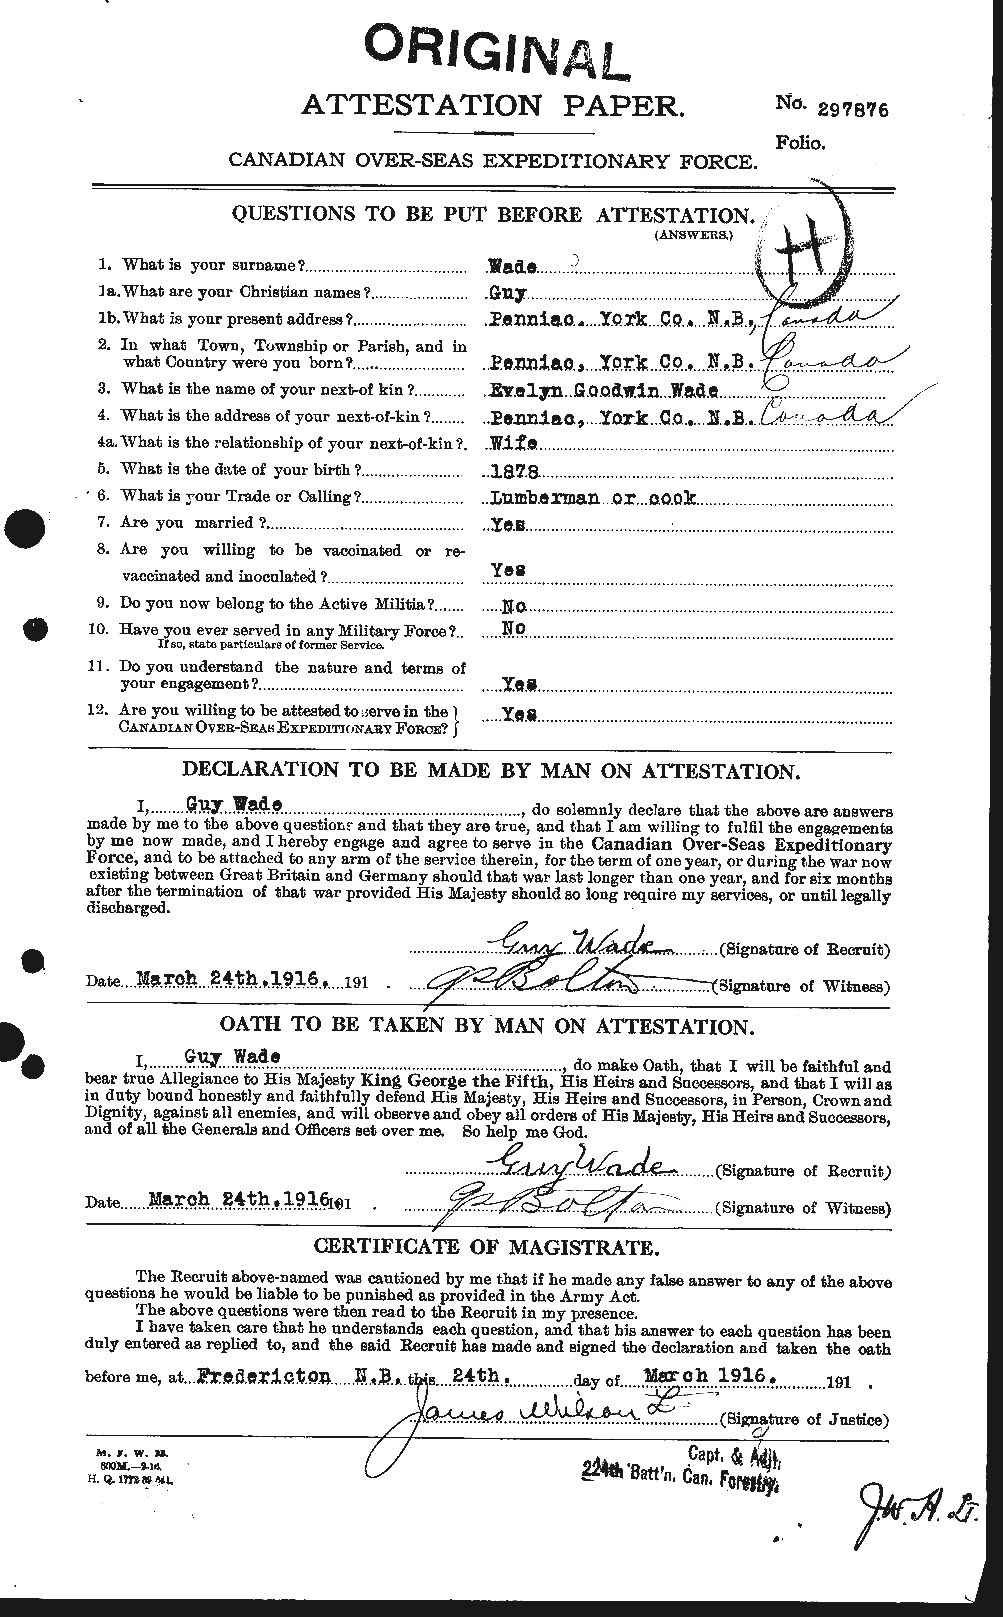 Personnel Records of the First World War - CEF 651223a